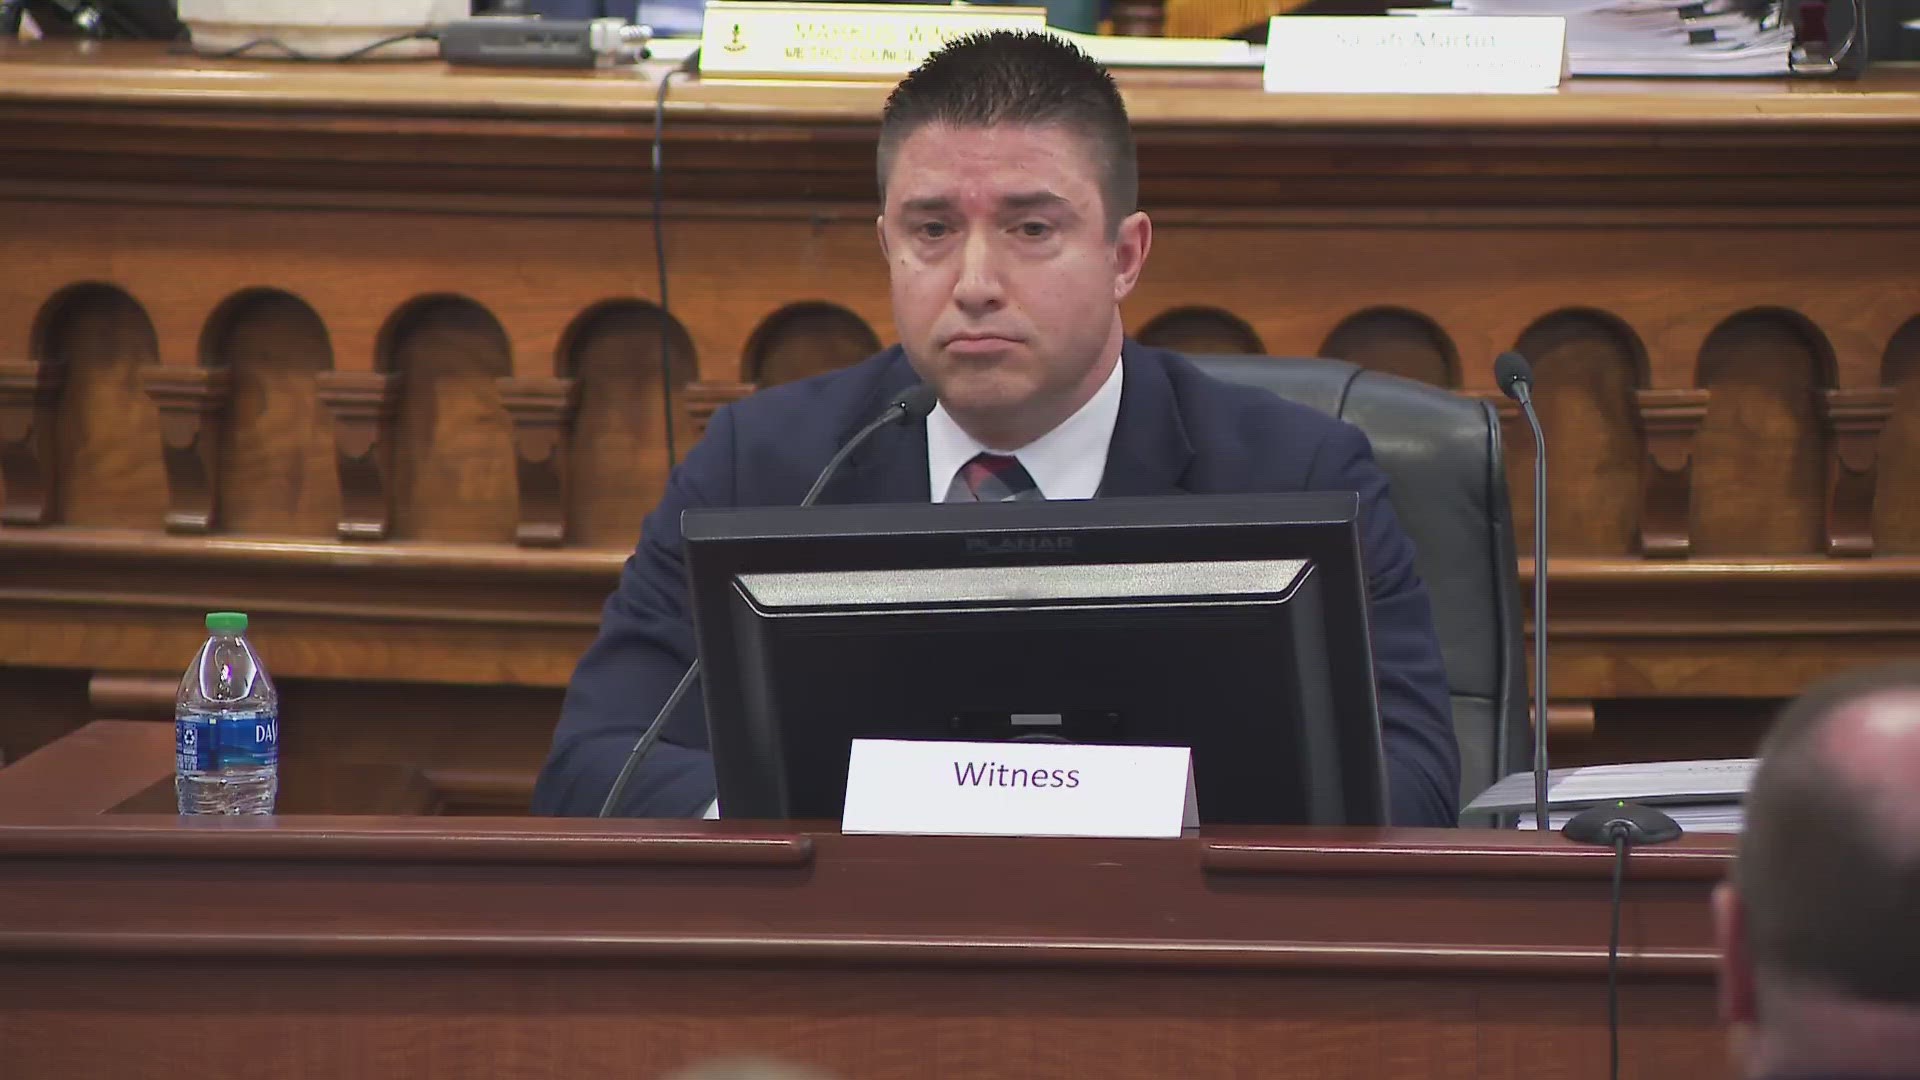 Metro Councilman Anthony Piagentini has already been found guilty of ethics violations was called to testify in his own removal trial before the full council.